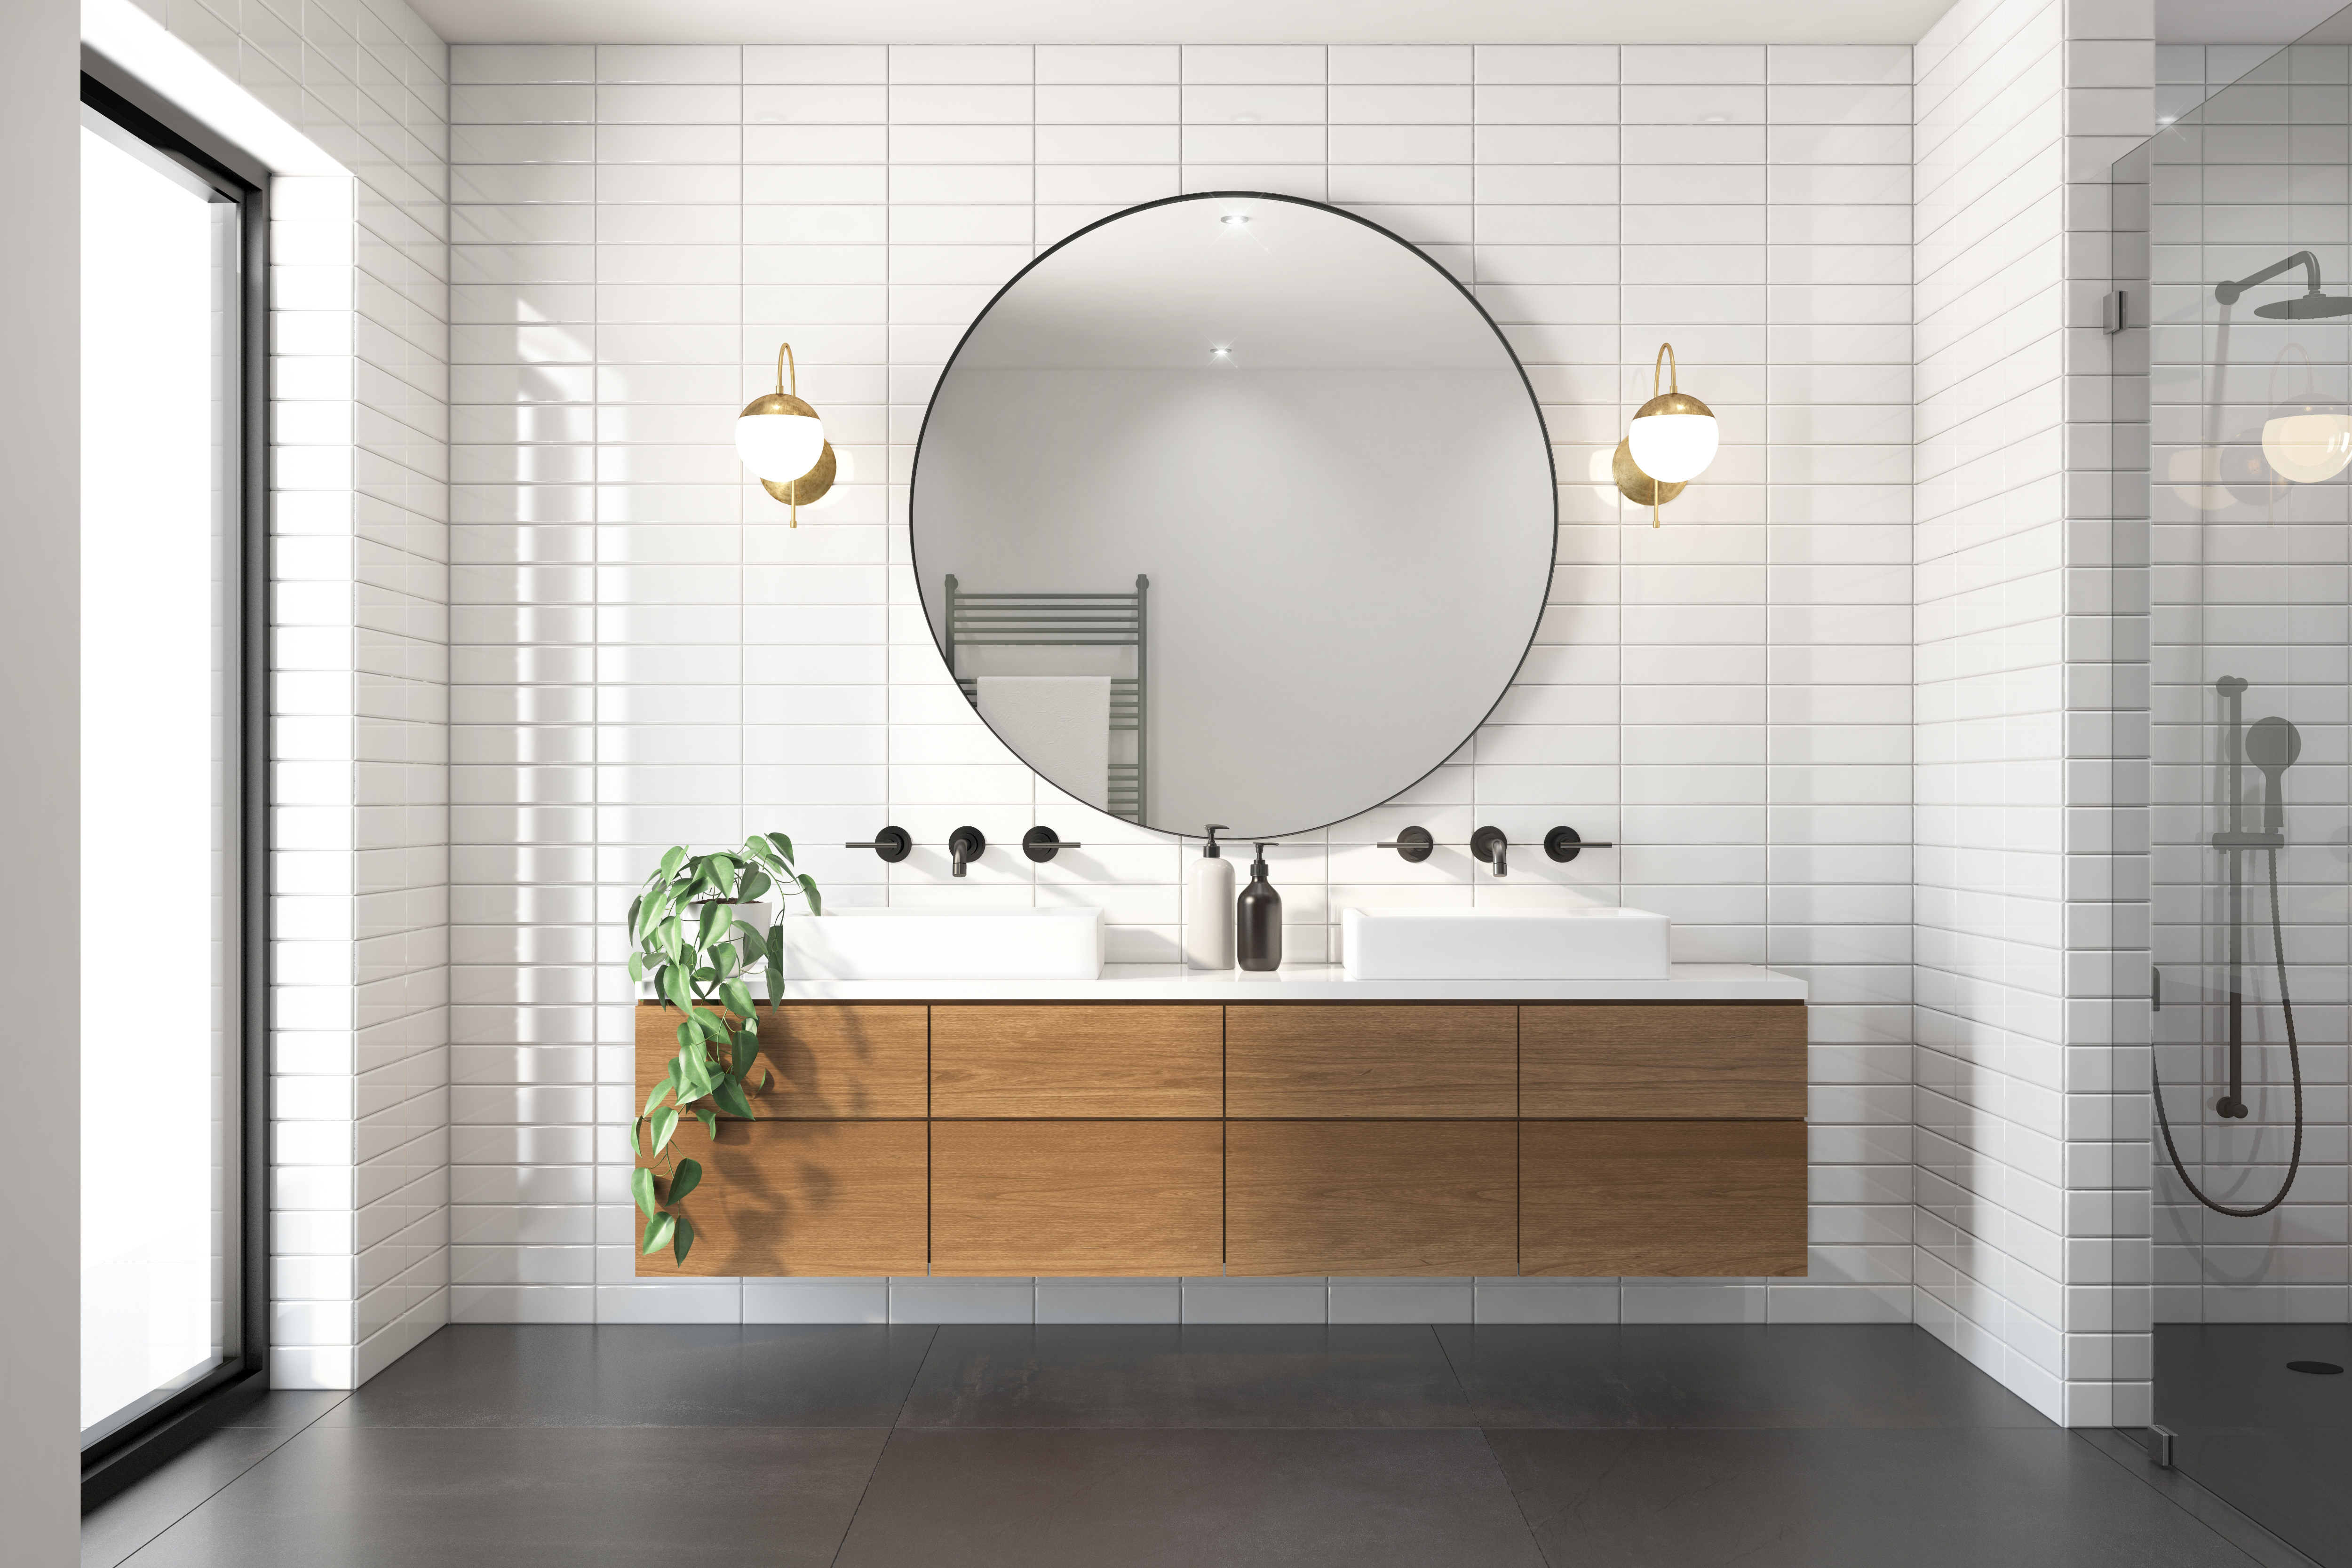 Bathroom with floating wood vanity, a large round mirror, and white tile walls.